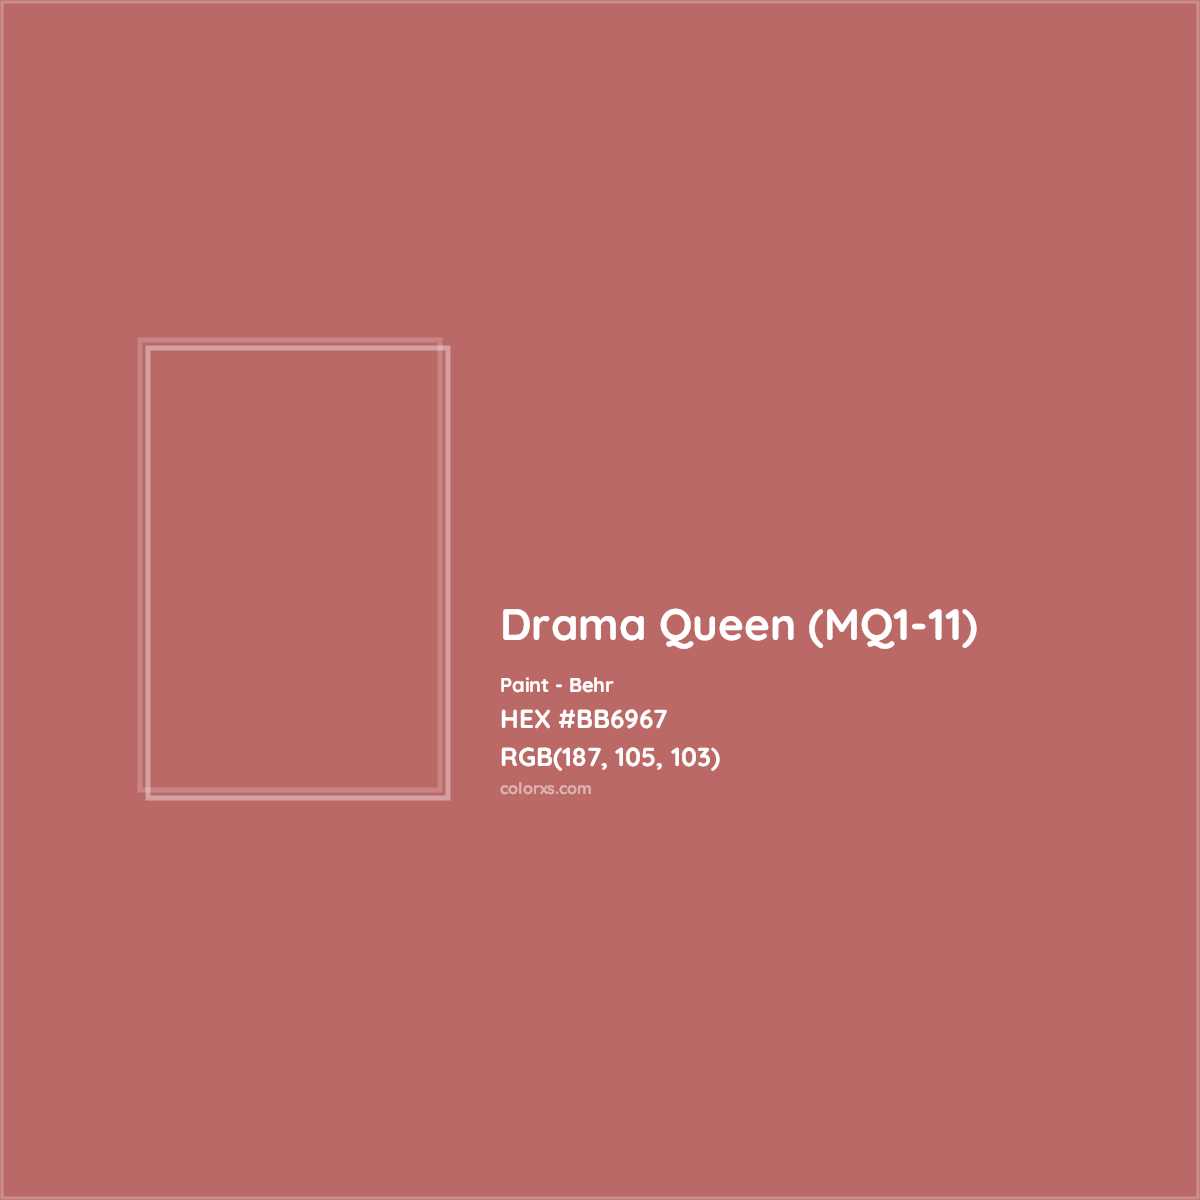 HEX #BB6967 Drama Queen (MQ1-11) Paint Behr - Color Code